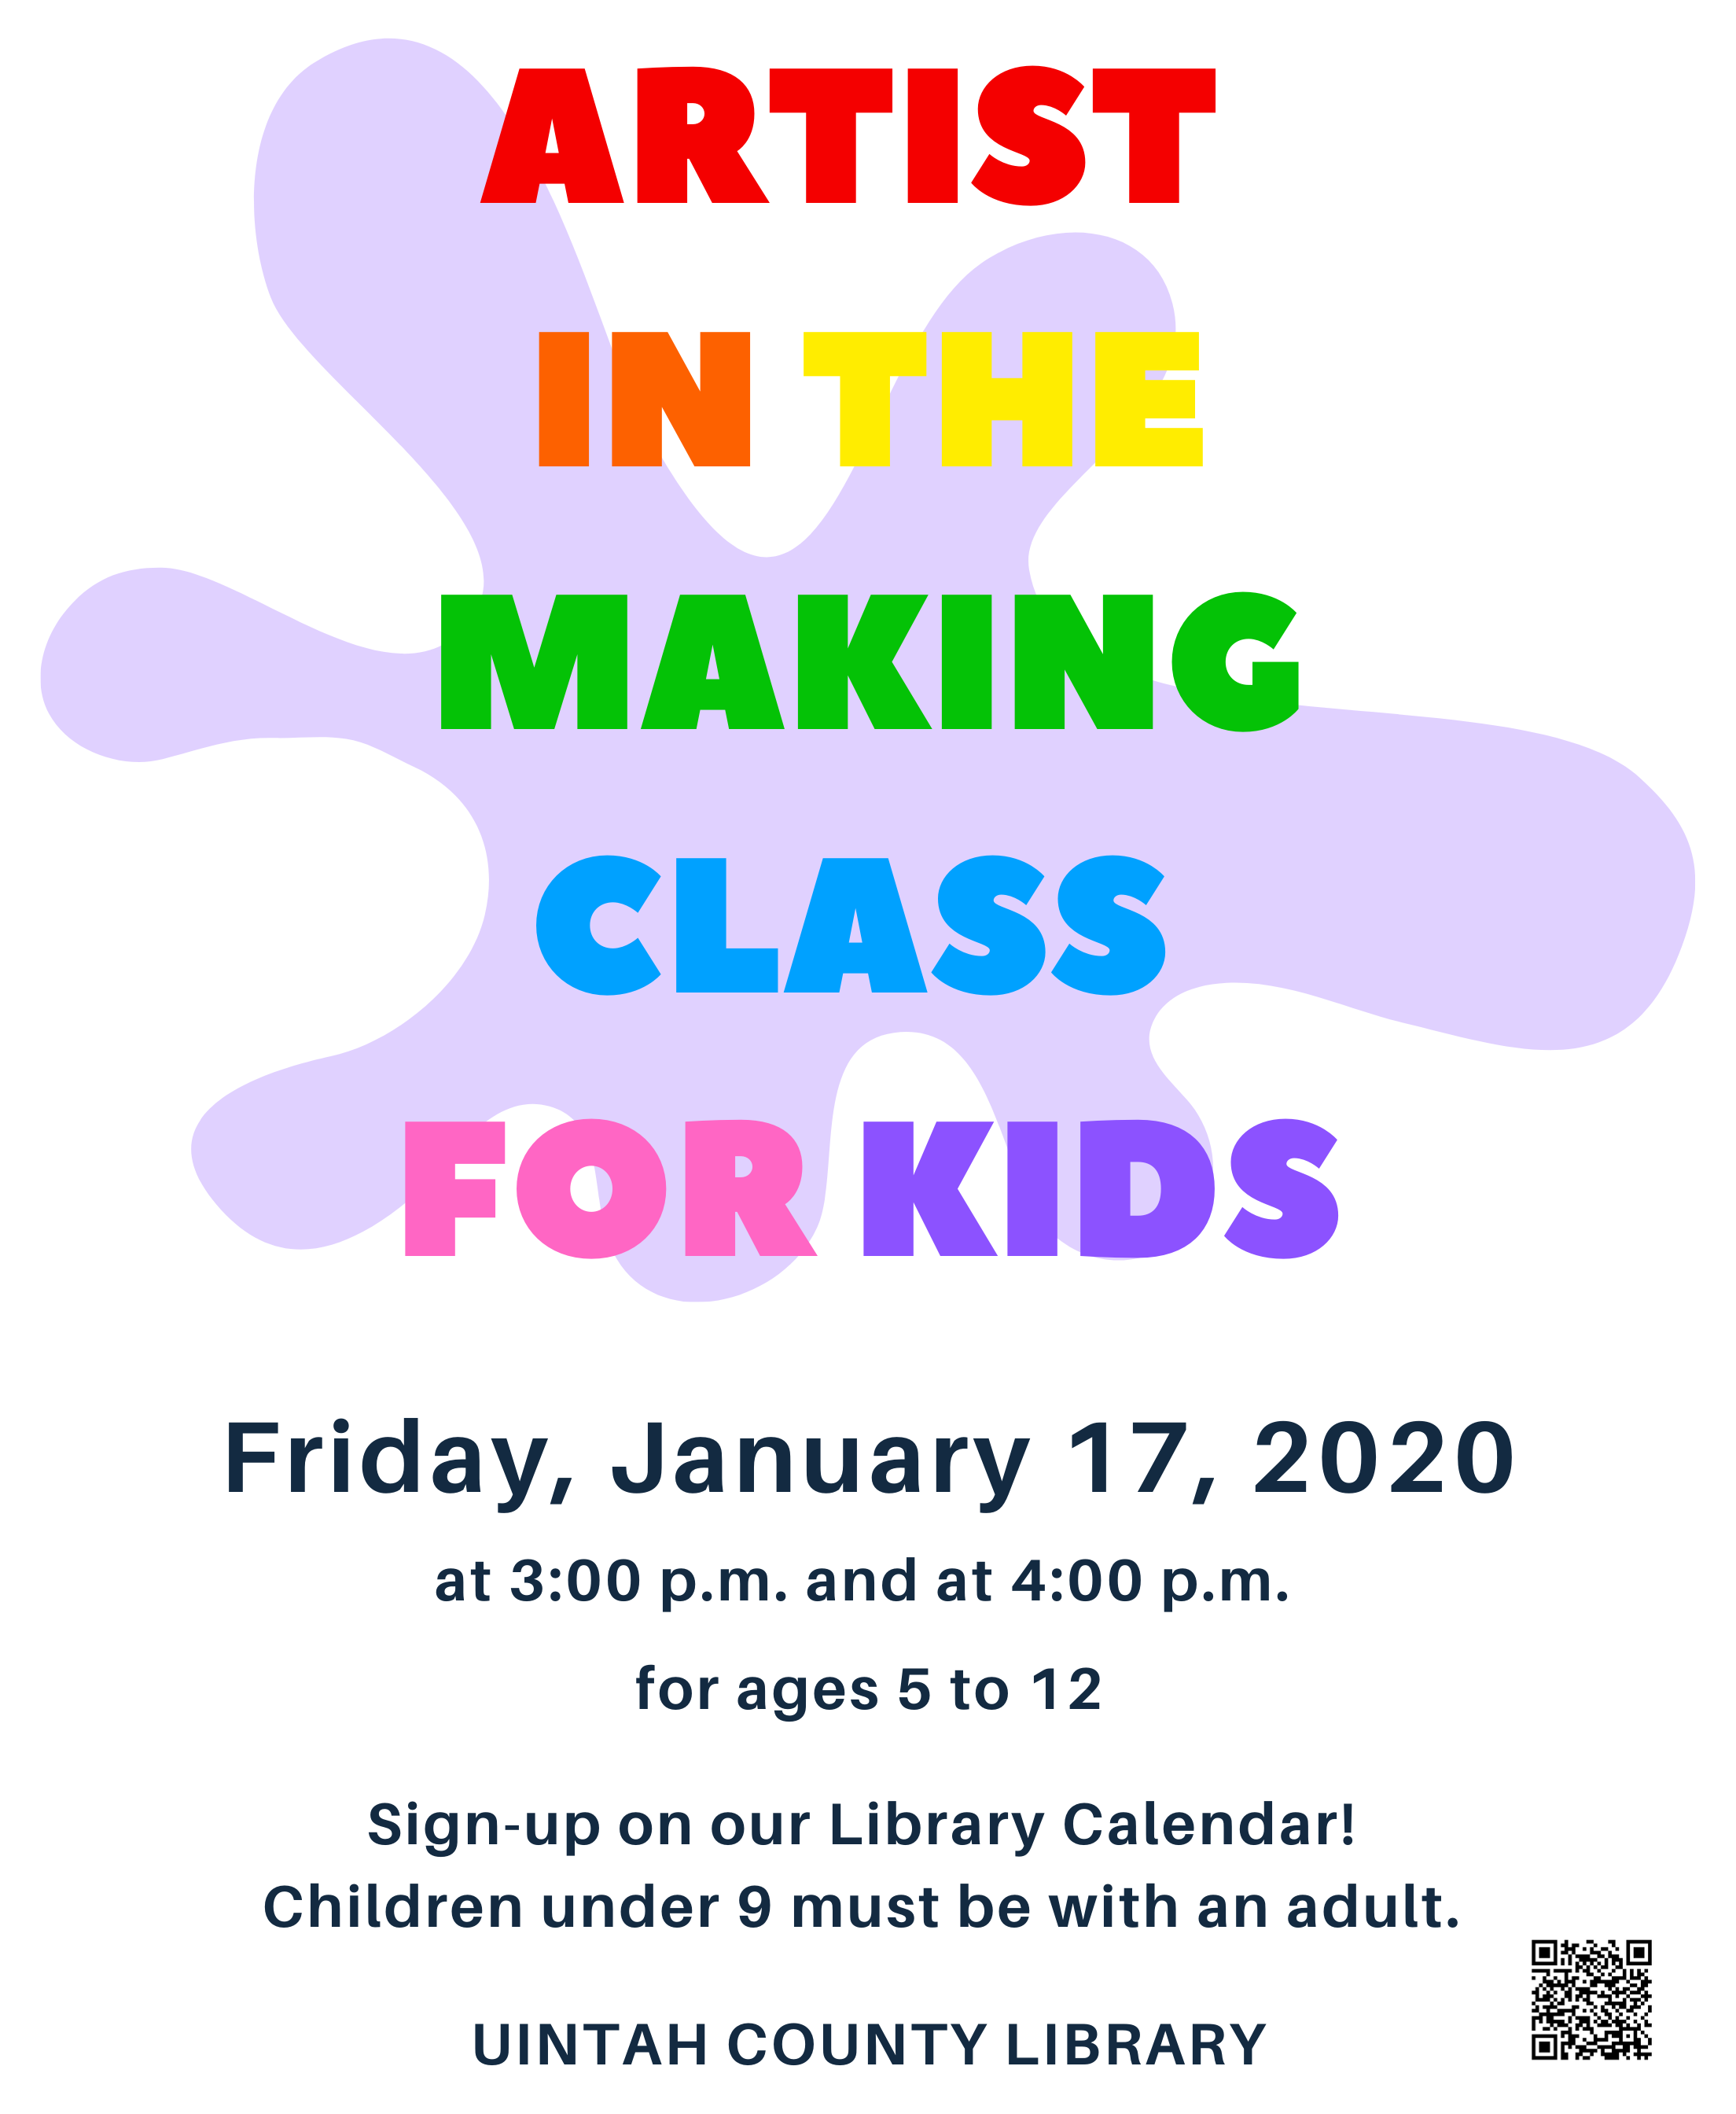 Artist in the Making Class for Kids   Friday, January 17, 2020  at 3:00 p.m. and at 4:00 p.m.  for ages 5 to 12   Sign-up on our Library Calendar!  Children under 9 must be with an adult. 